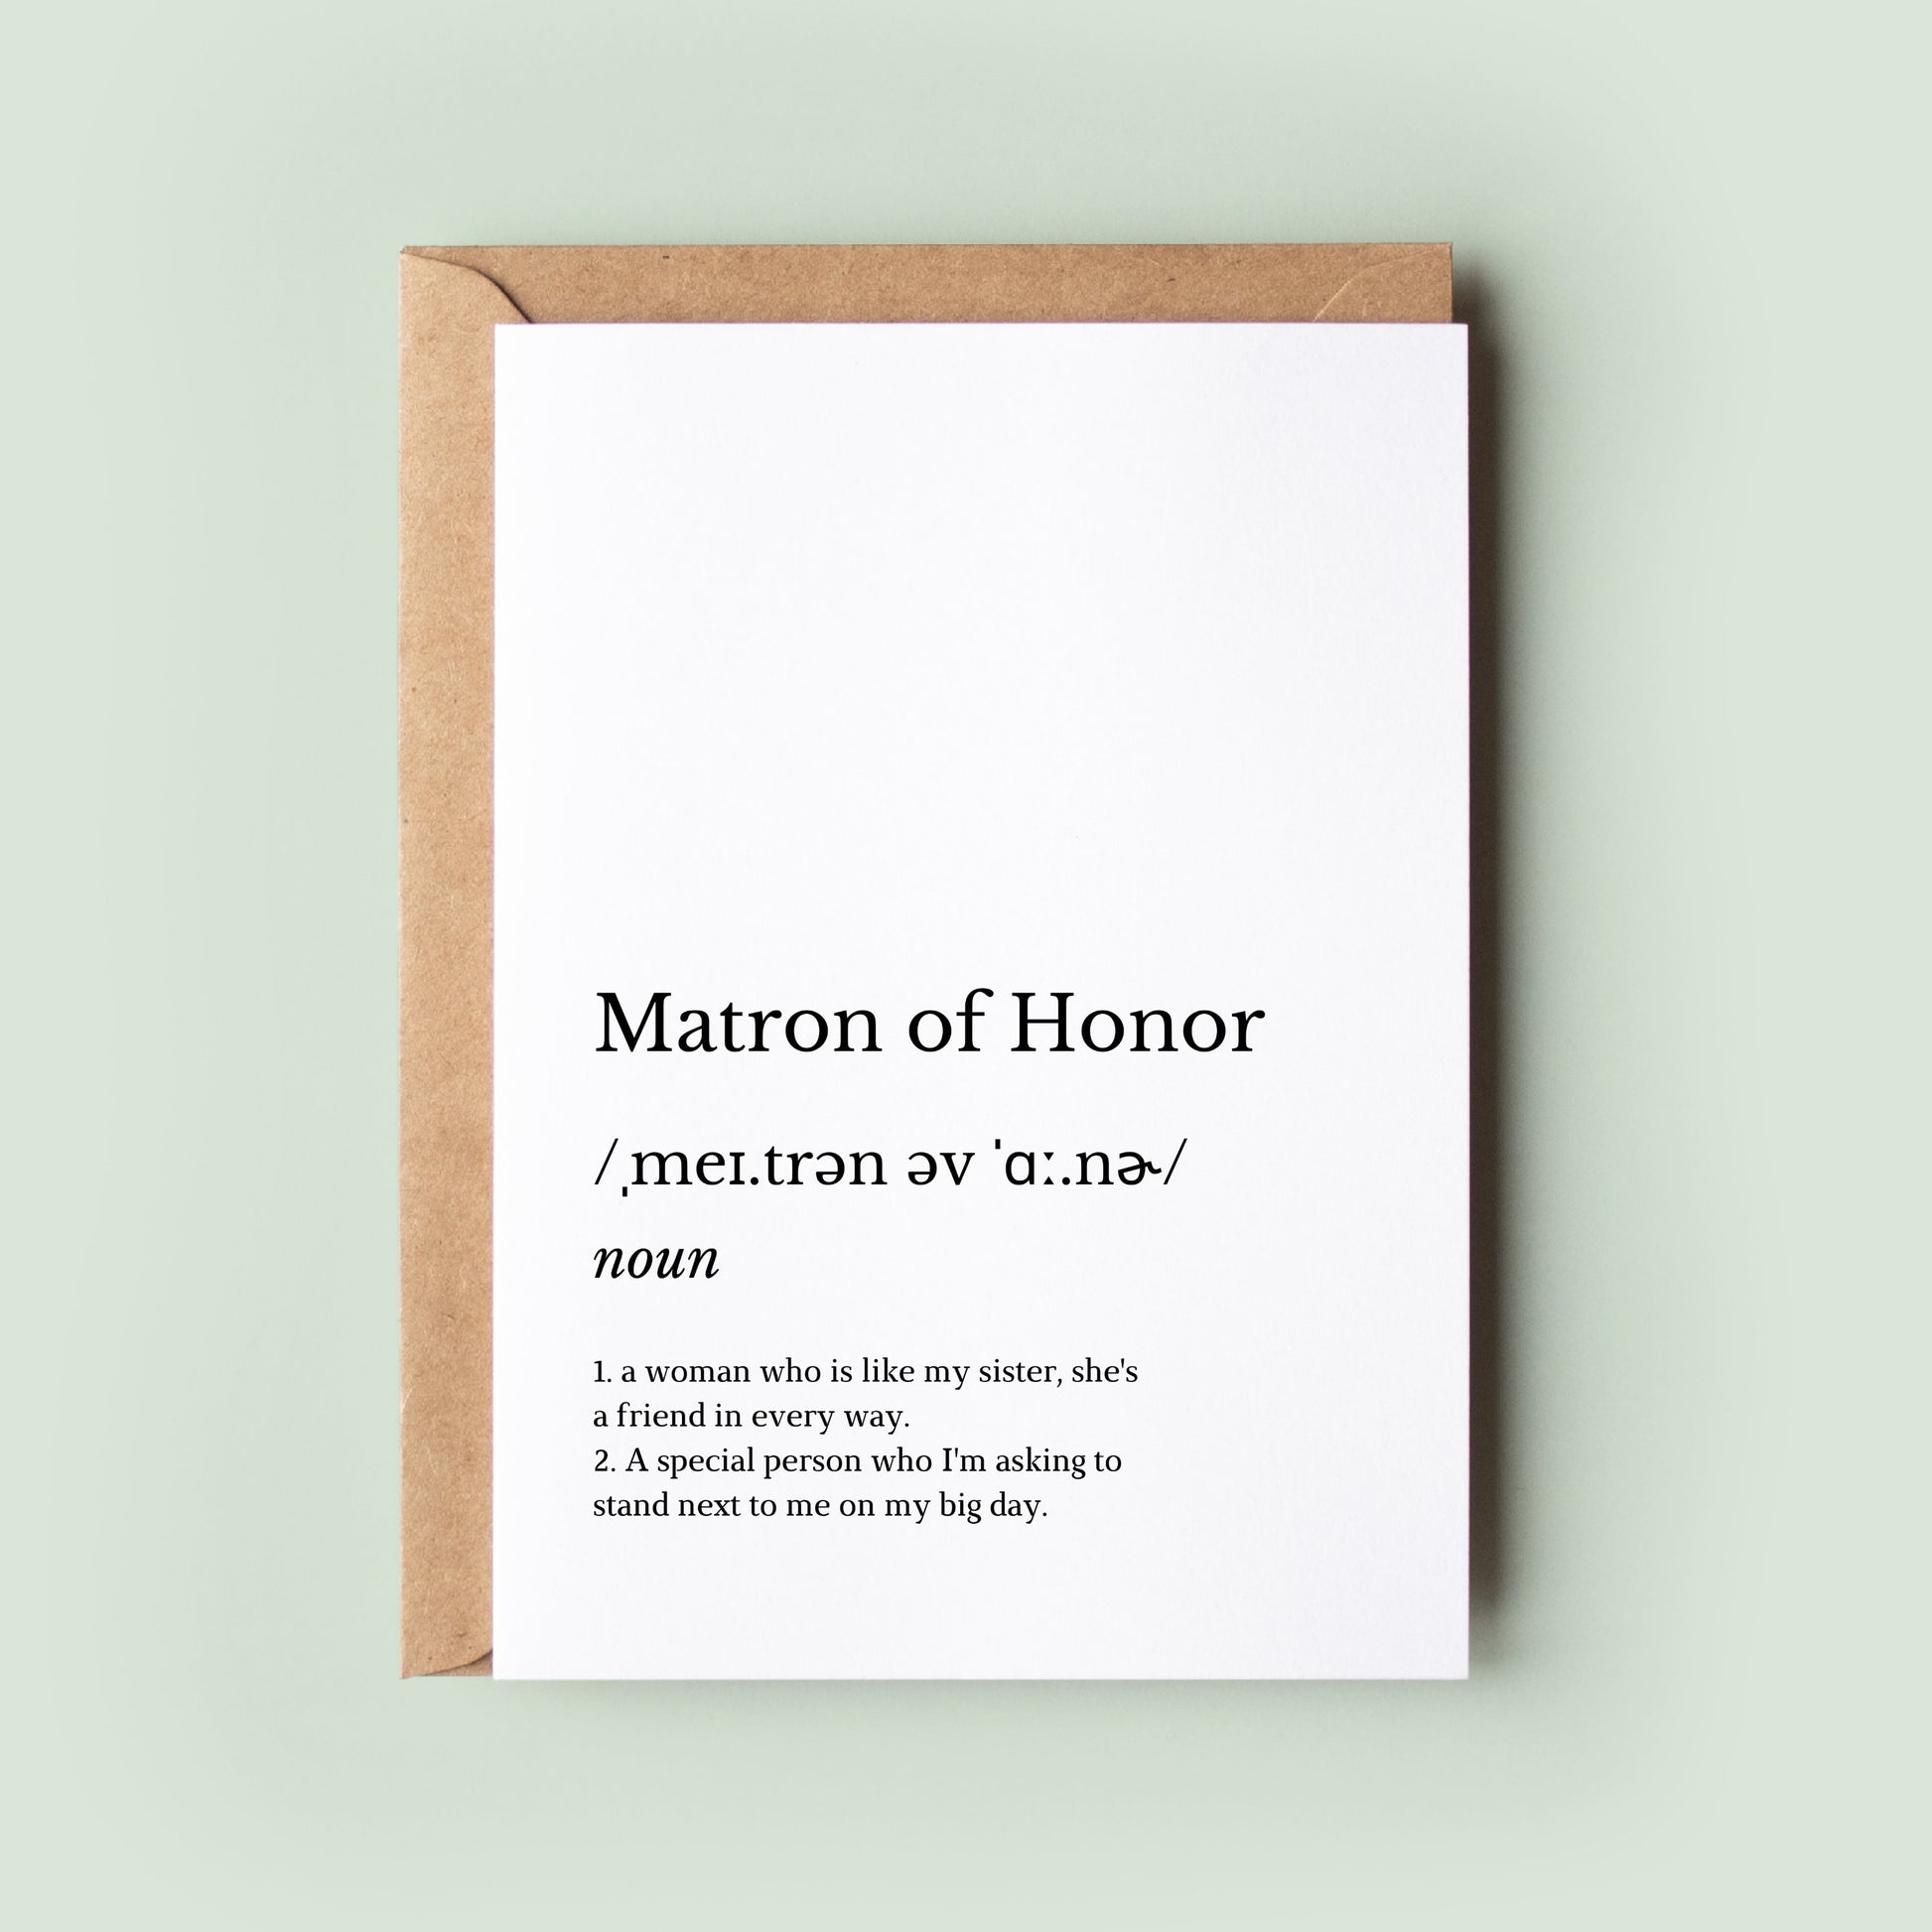 Matron of Honor Definition Card, Will You Be My Matron of Honor Cards, Matron of Honor Proposal Card, Matron of Honor Thank You Wedding Card